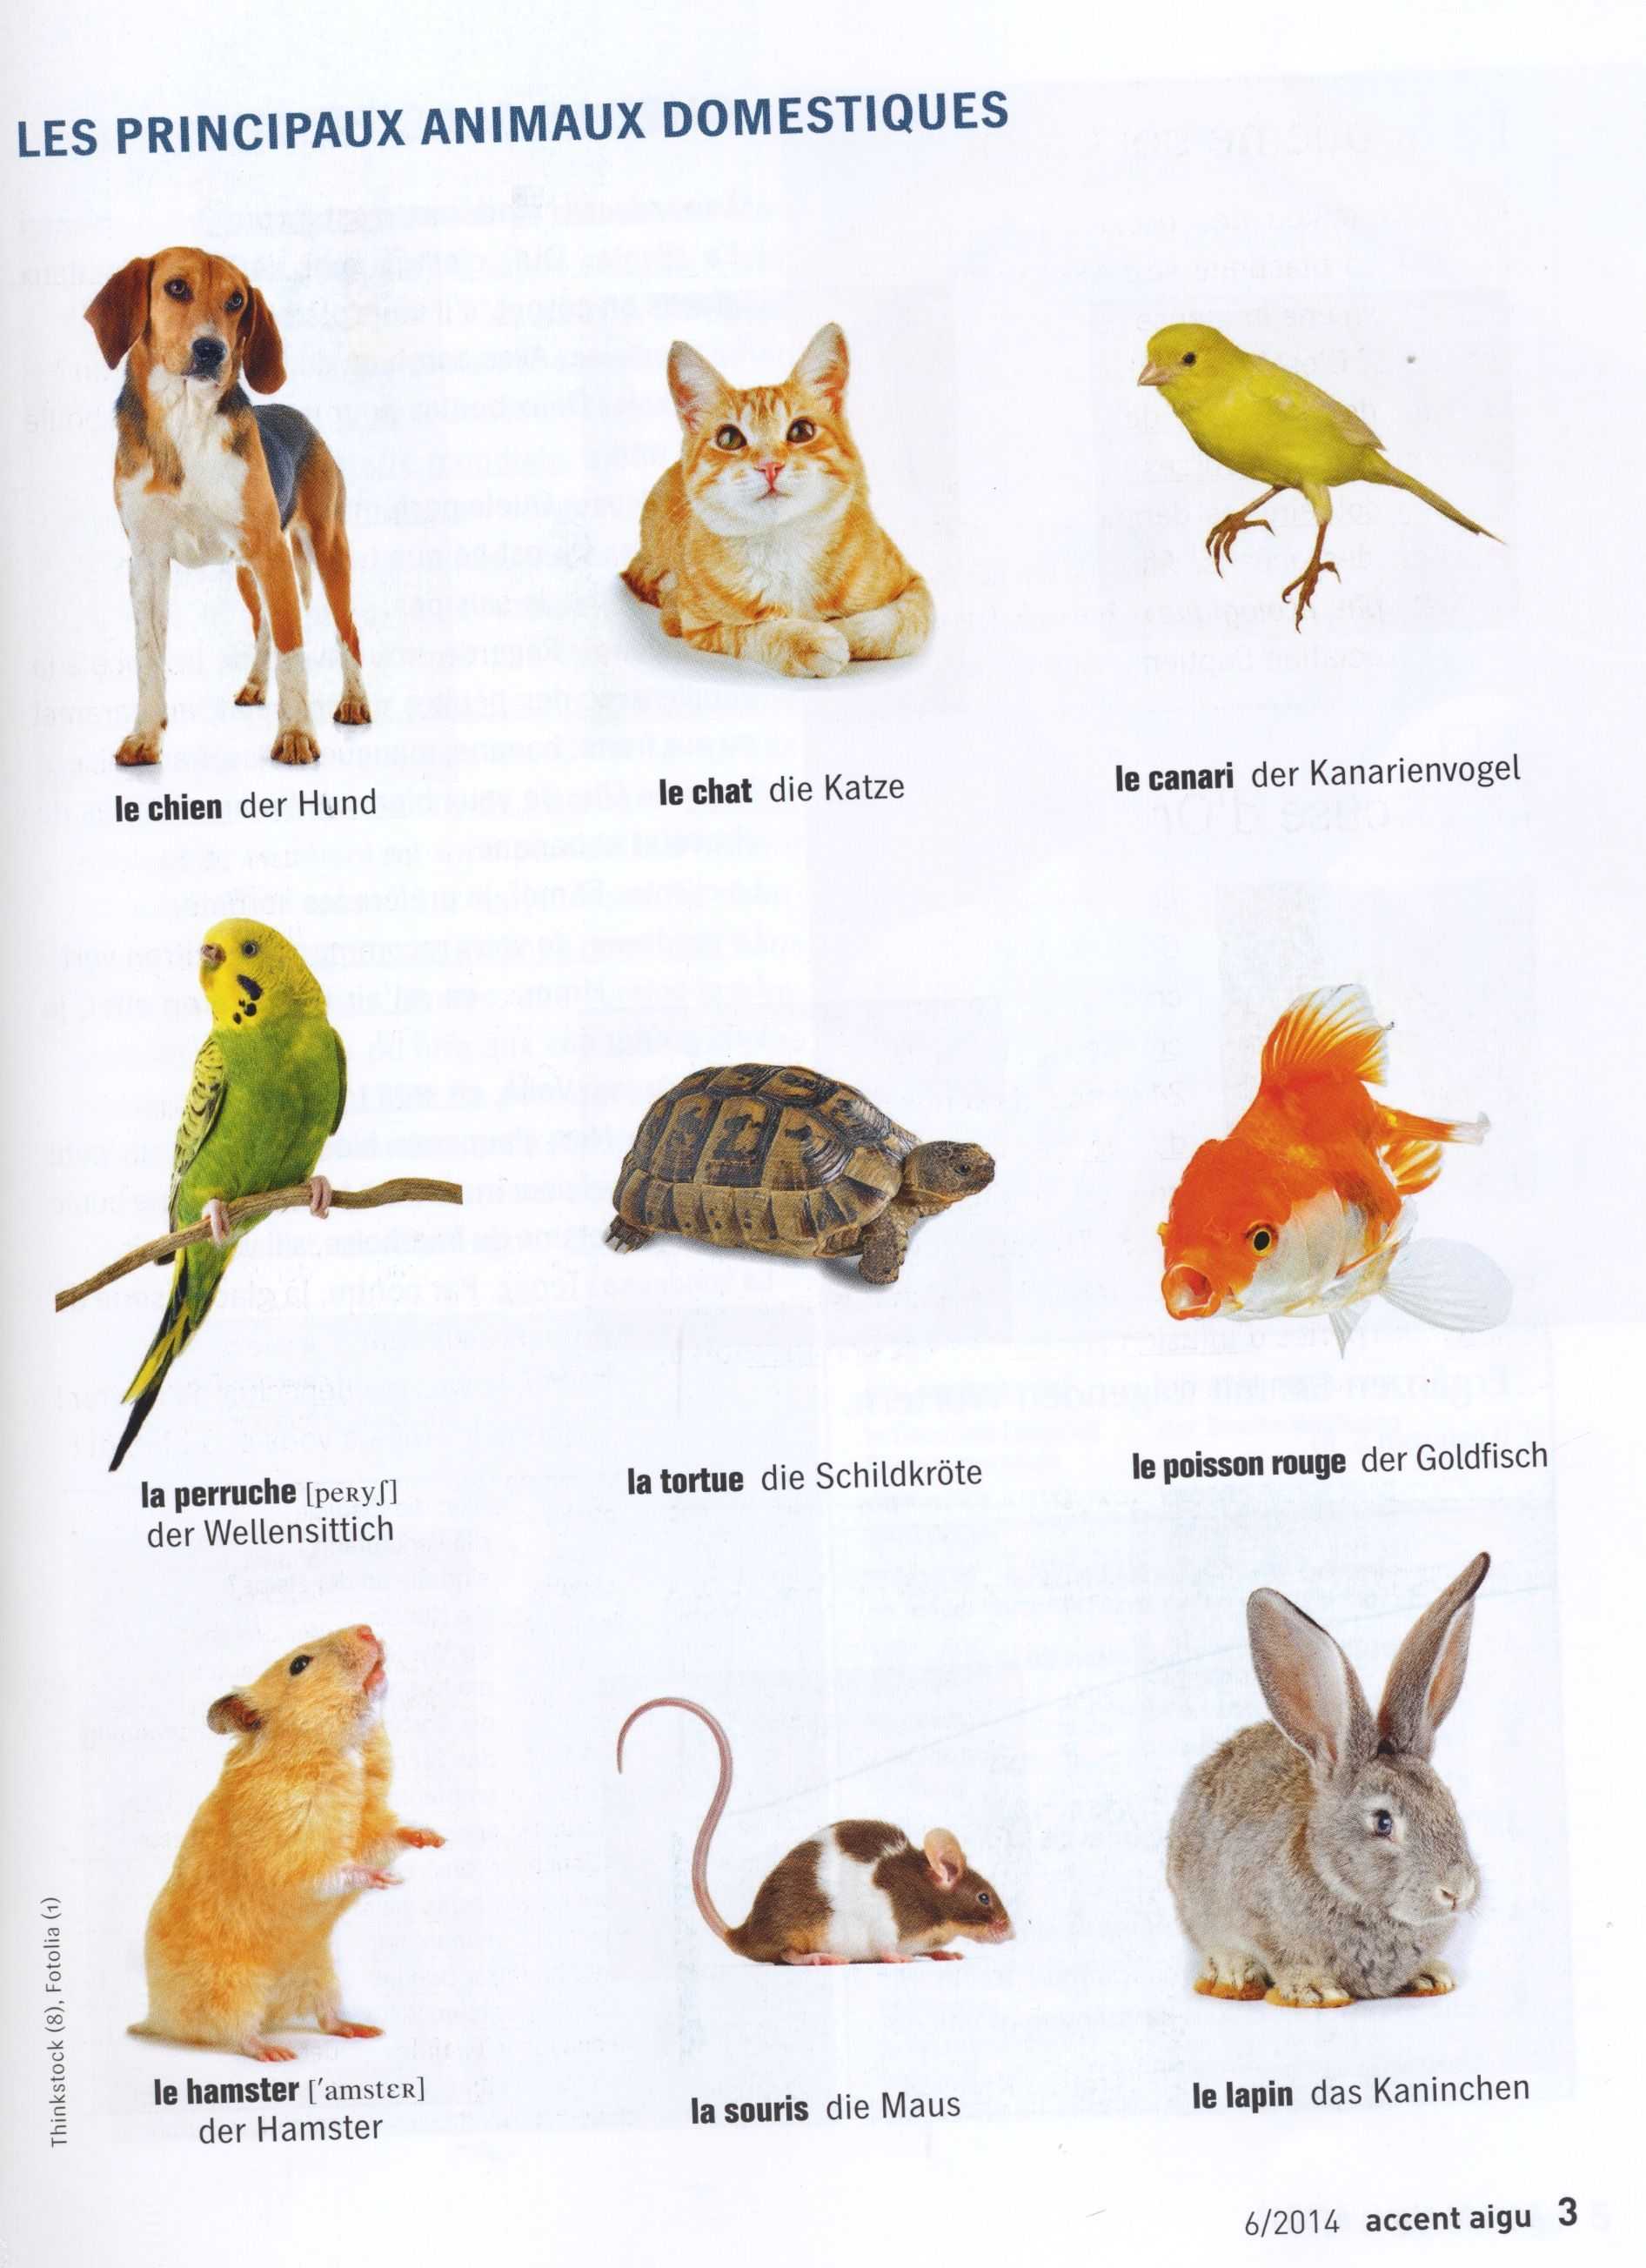 Animal Adaptations Worksheets Along with Les Principaux Animaux Domestiques